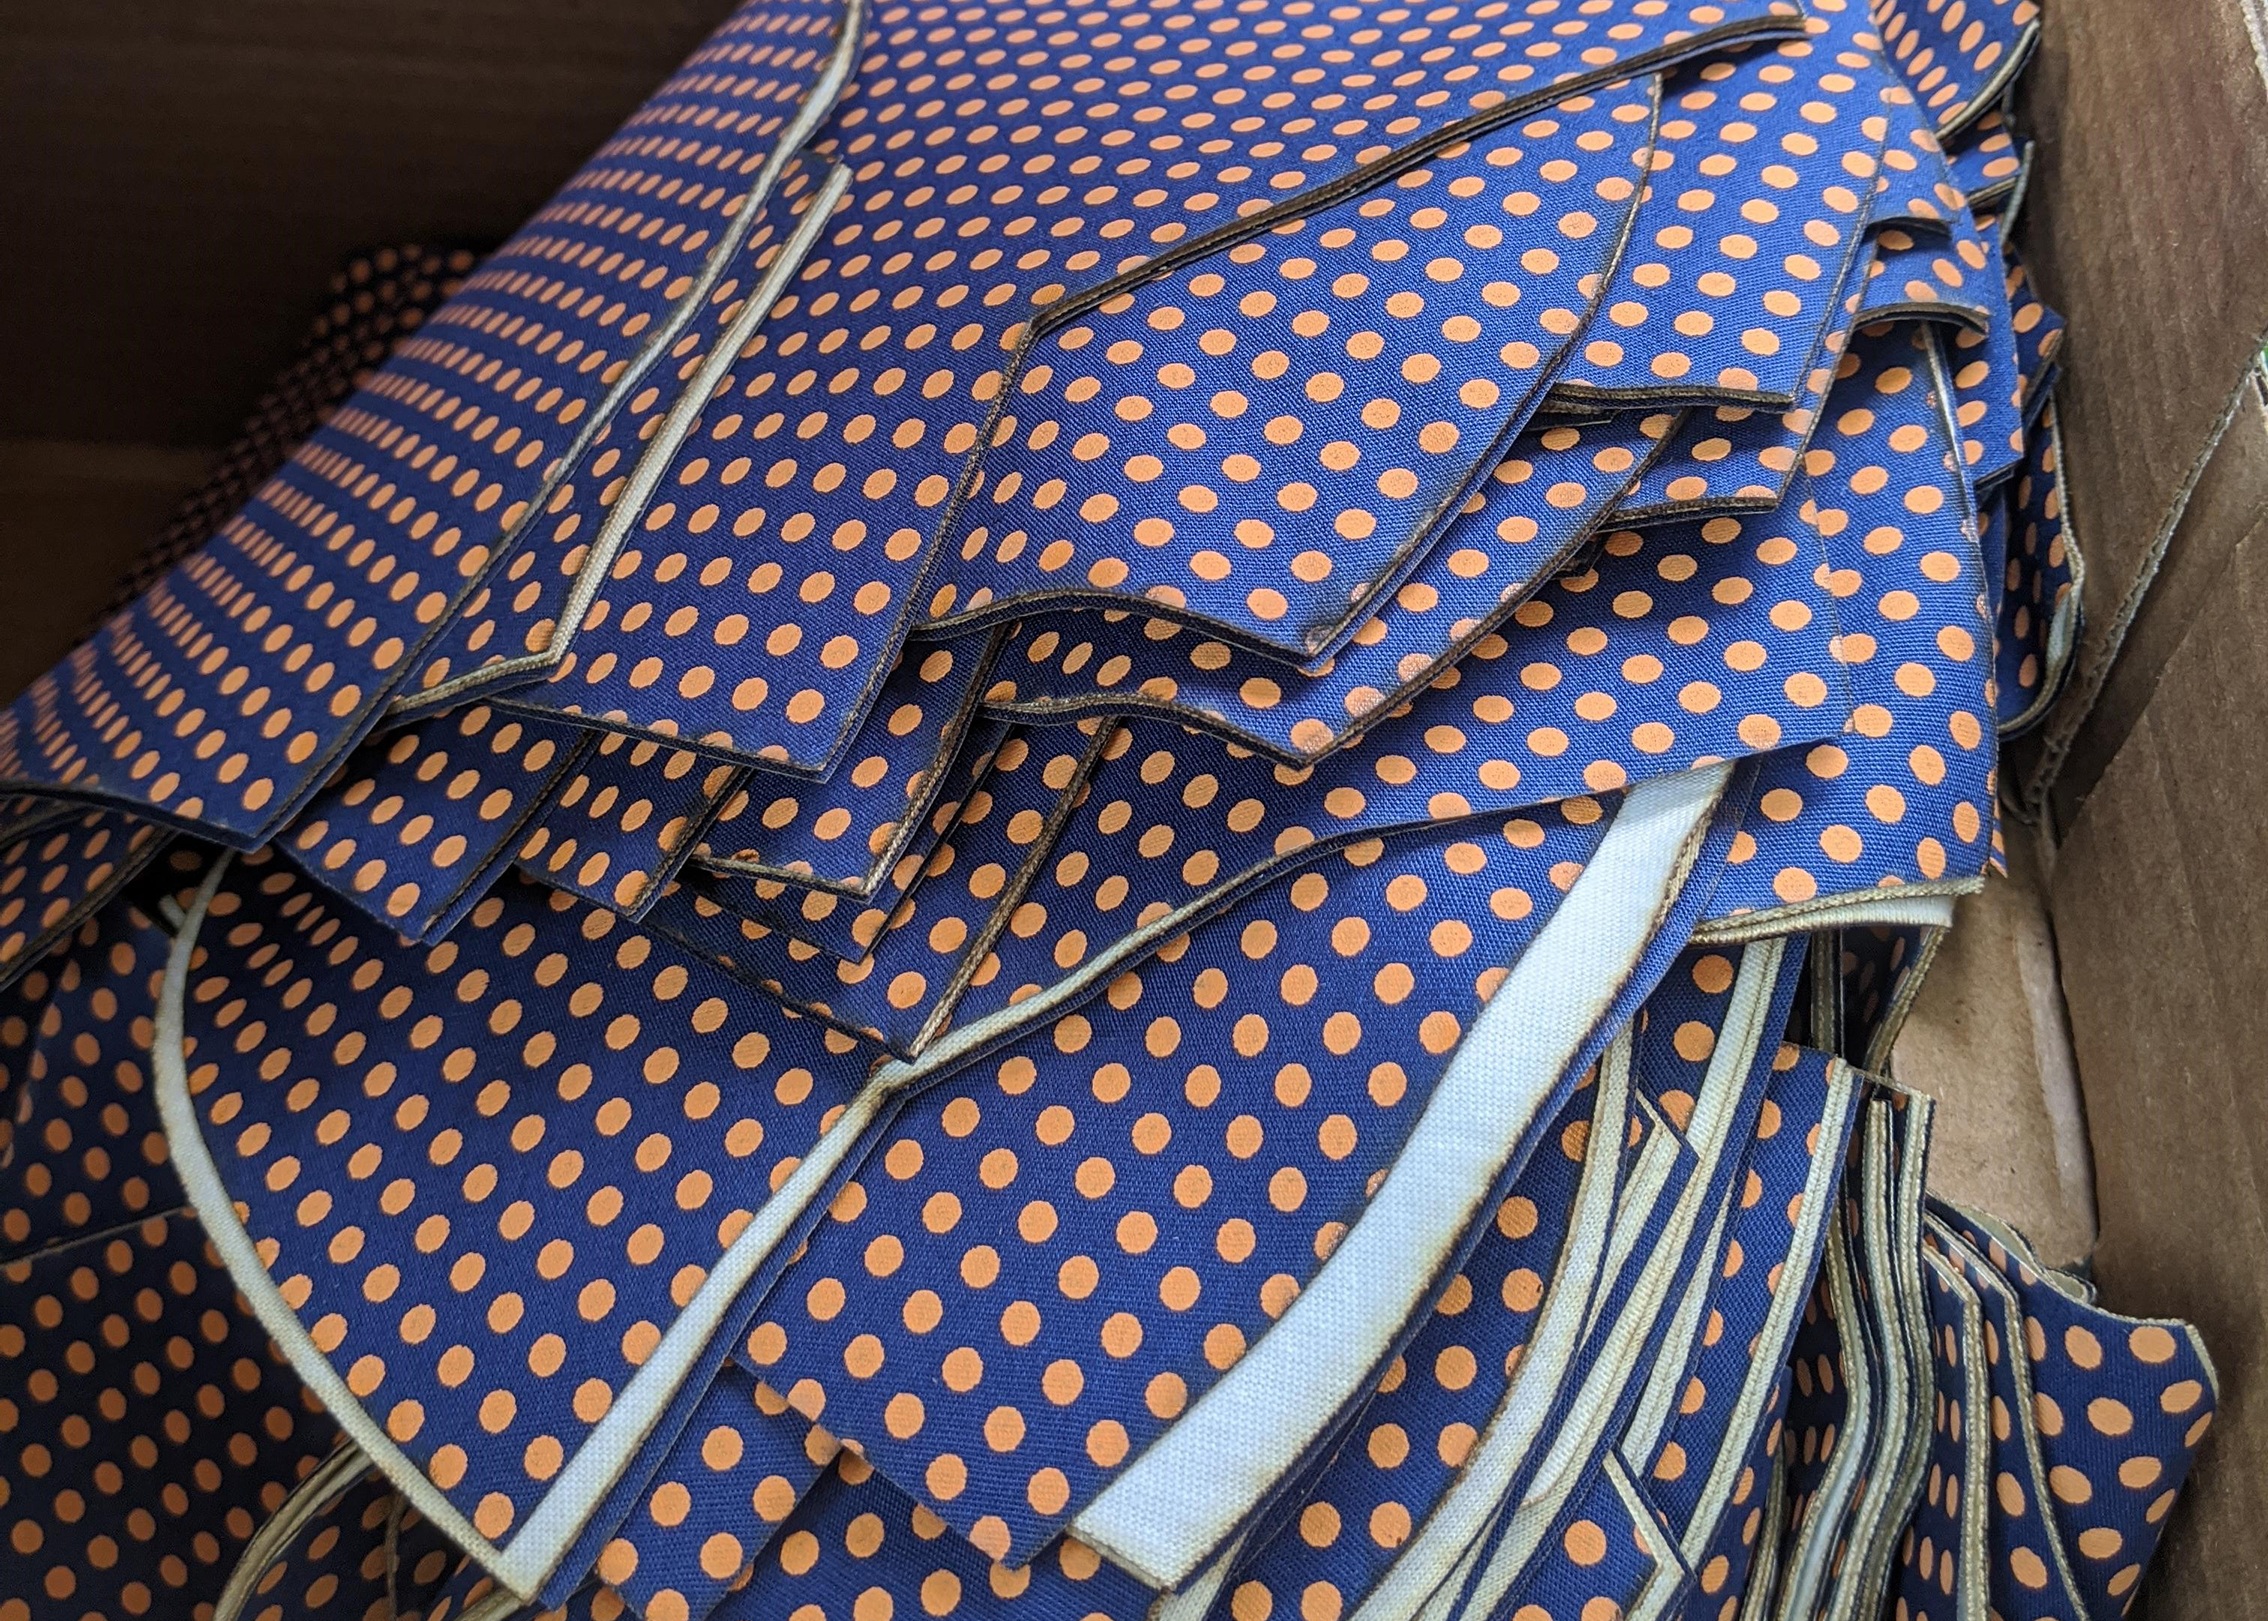 Box of pre-cut mask fabric which is blue with orange dots.